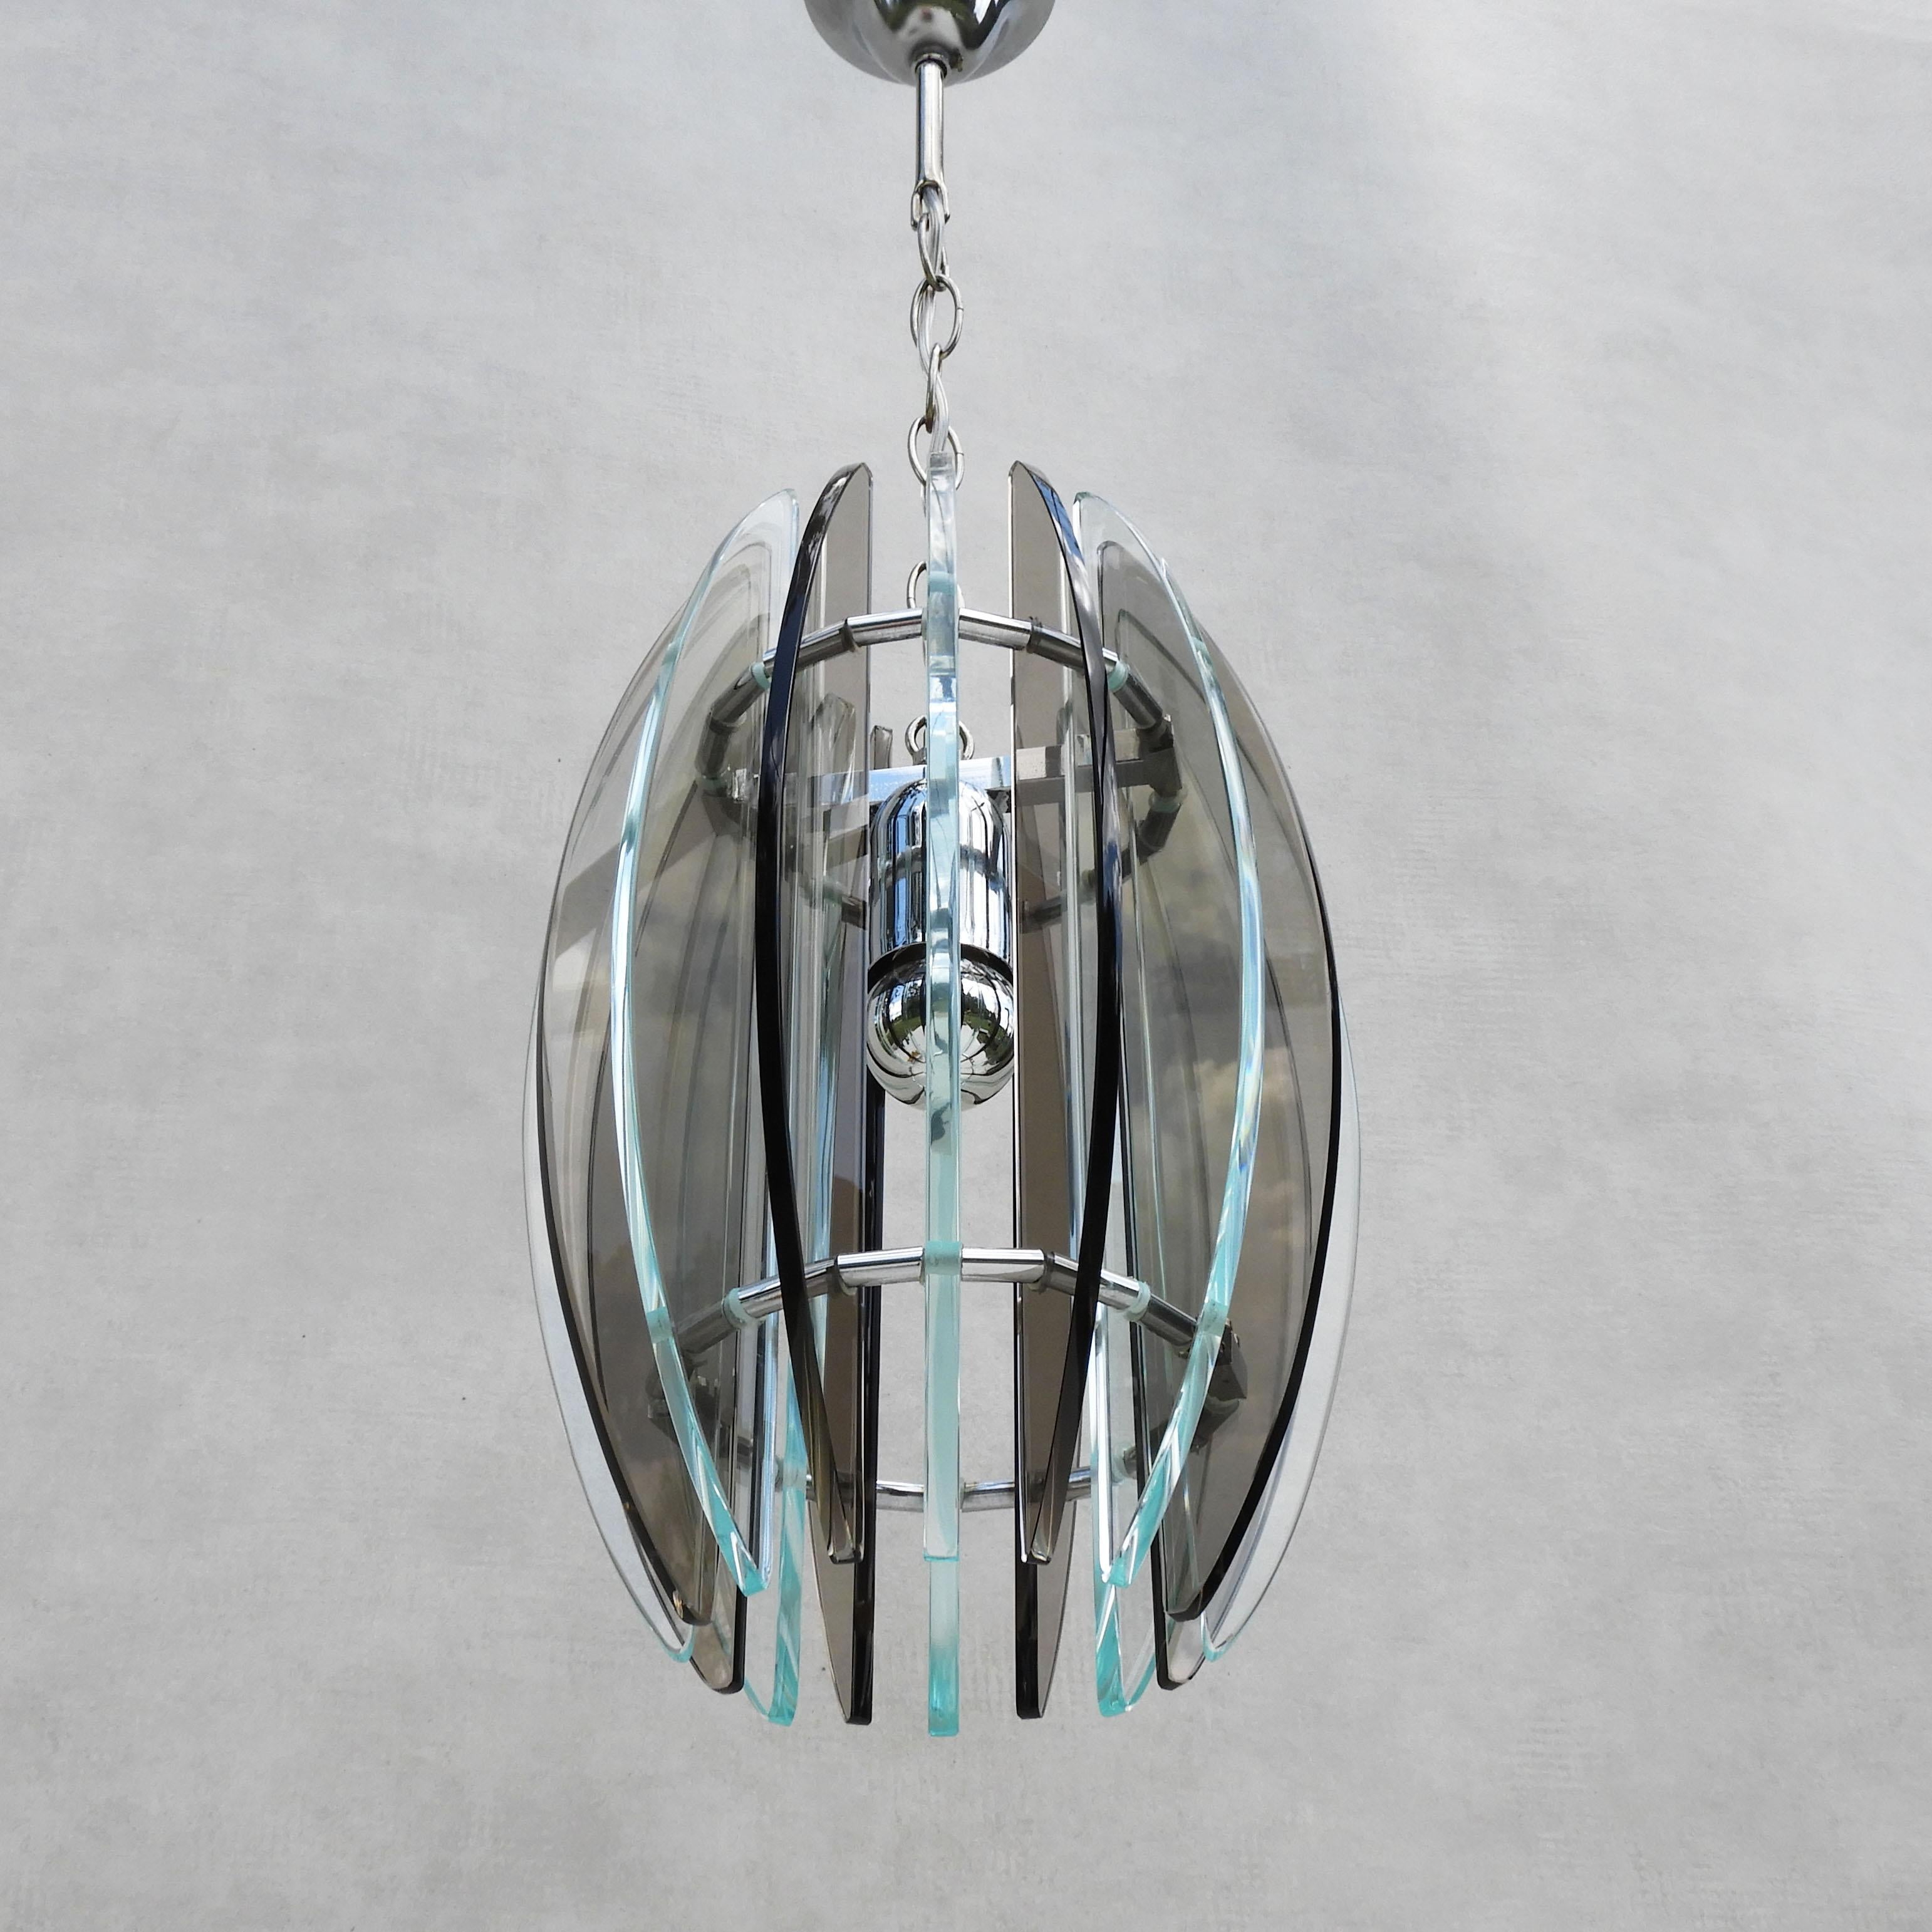 Italian Mid Century Glass Pendant Light Fitting from Veca C1970  In Good Condition For Sale In Trensacq, FR